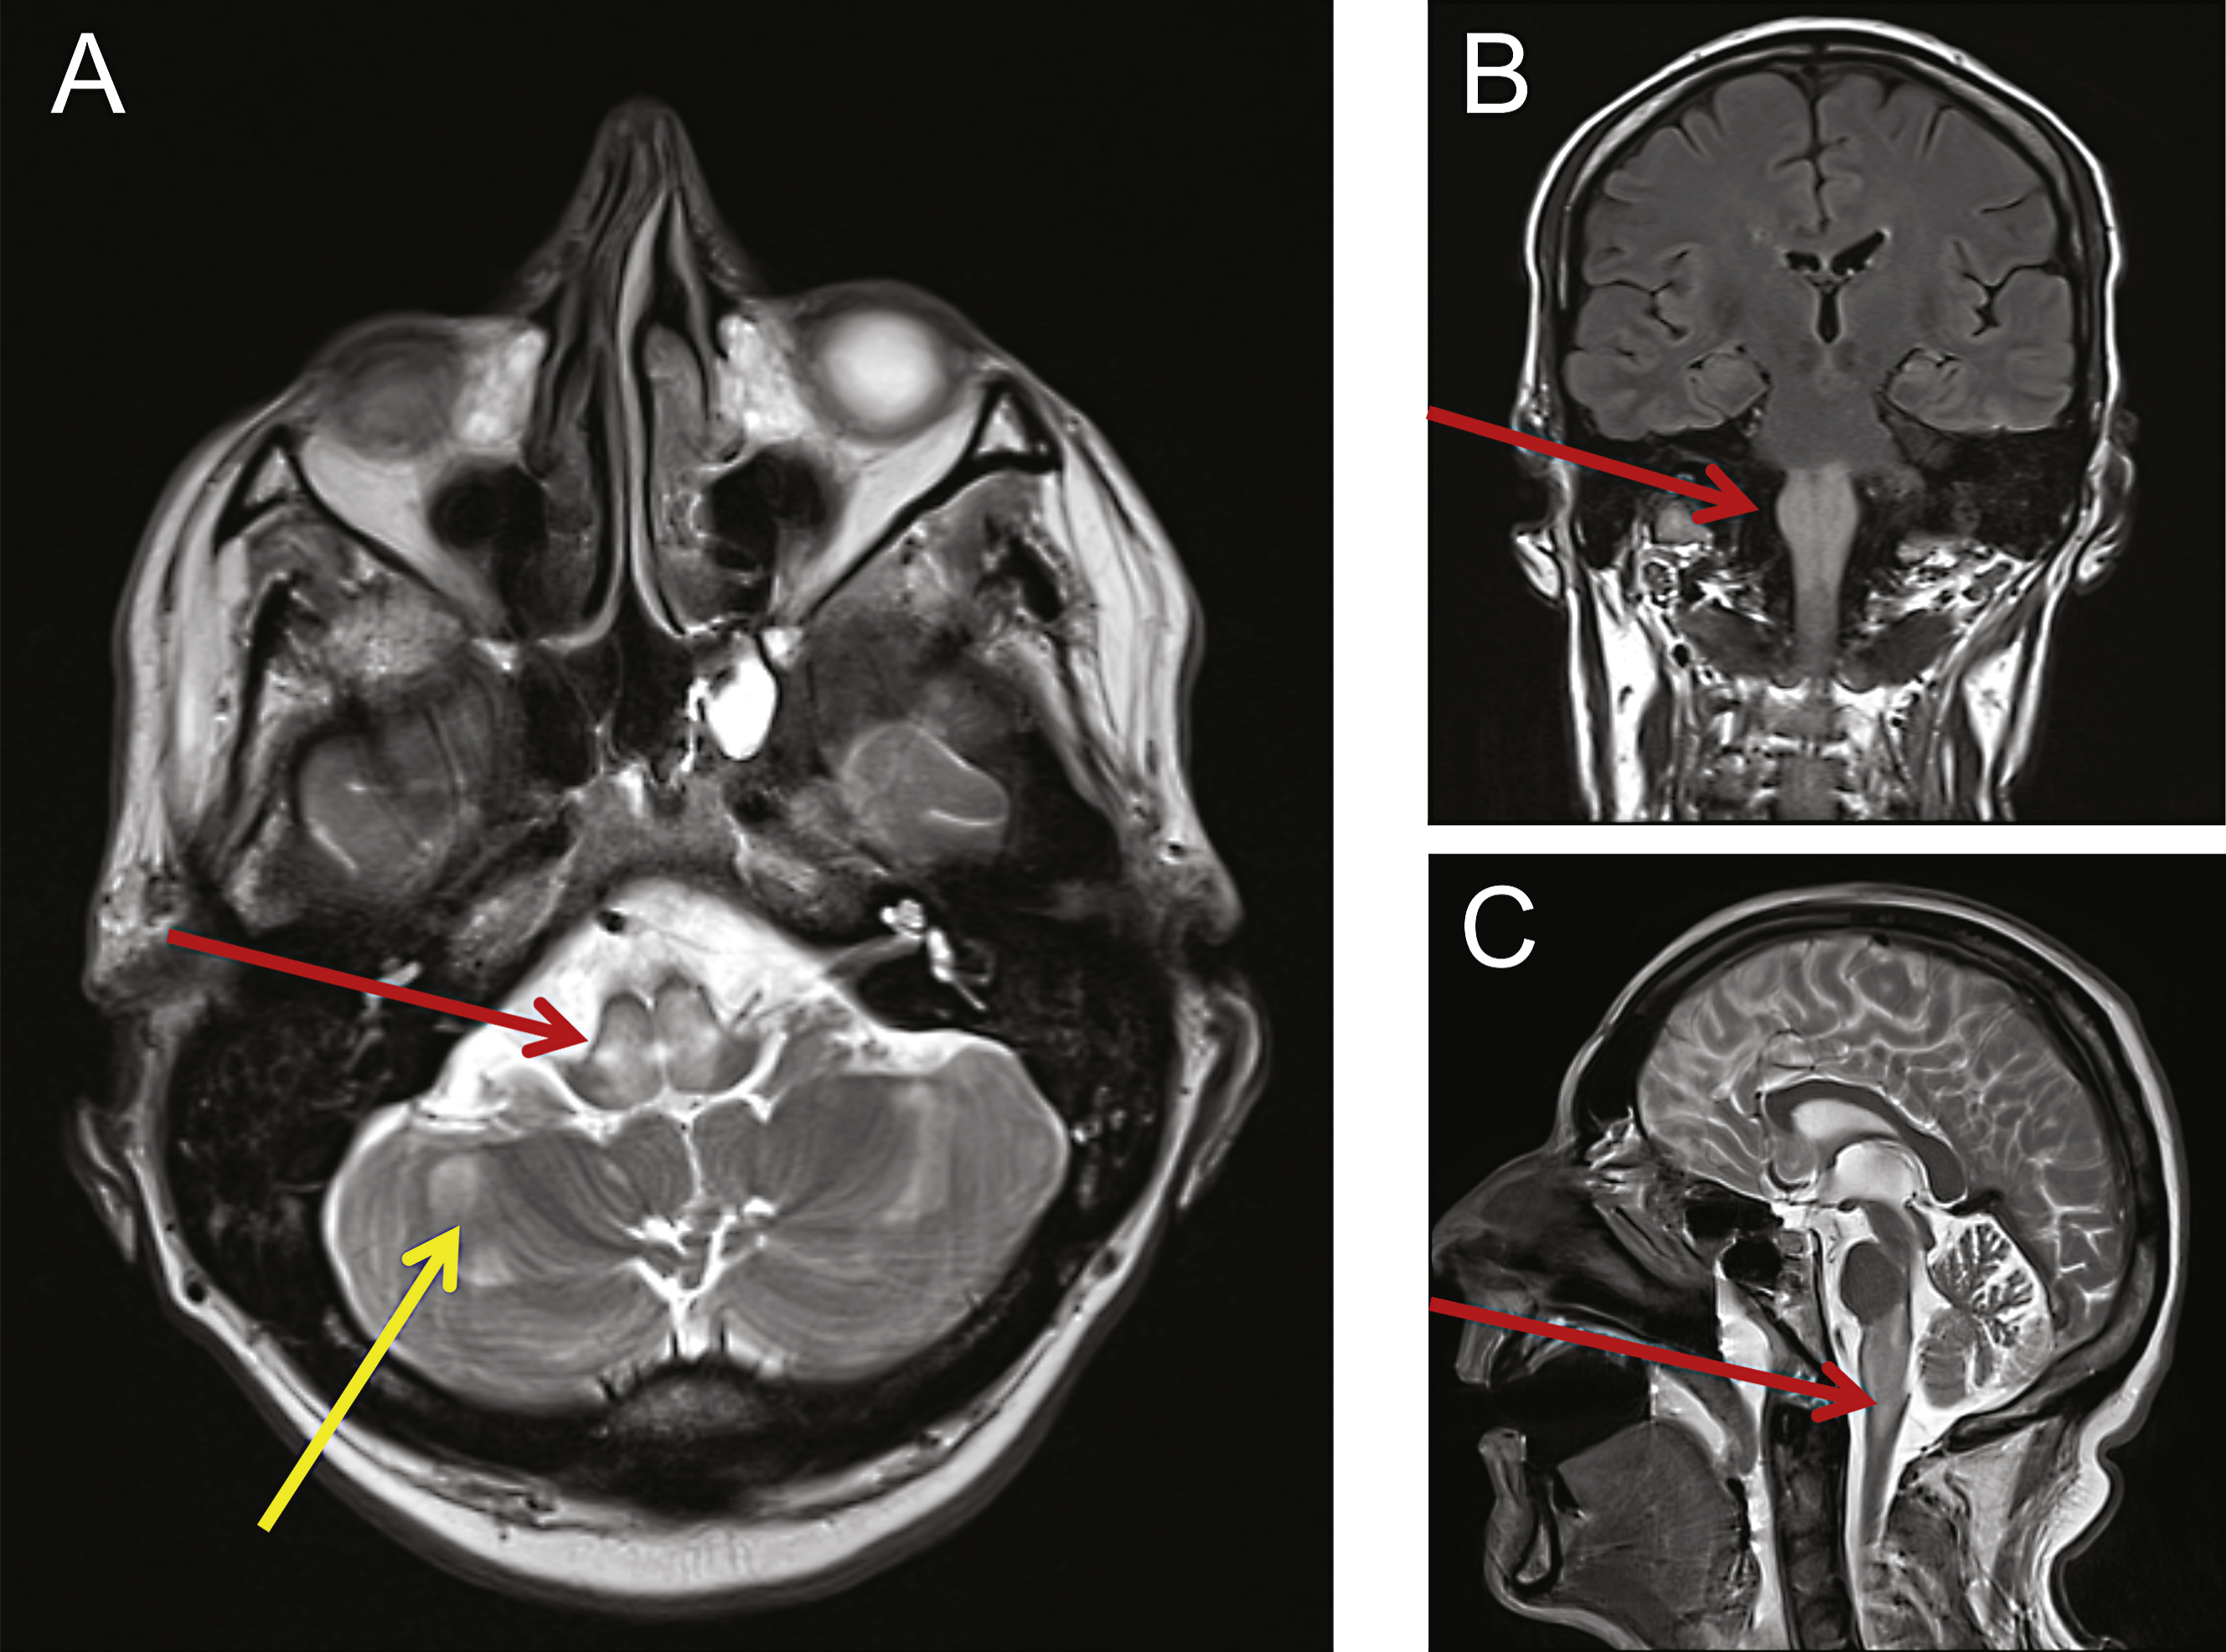 MRI revealed abnormalities consistent with mitochondrial disease. Cranial MRI was performed showing swelling and abnormal high T2-weighted signal changes centrally within the dorsal pons (A, red arrow) and medulla (B, C red arrows). Other small foci of restricted diffusion were detected and also seen within the cerebellar hemispheres (A, yellow arrow).